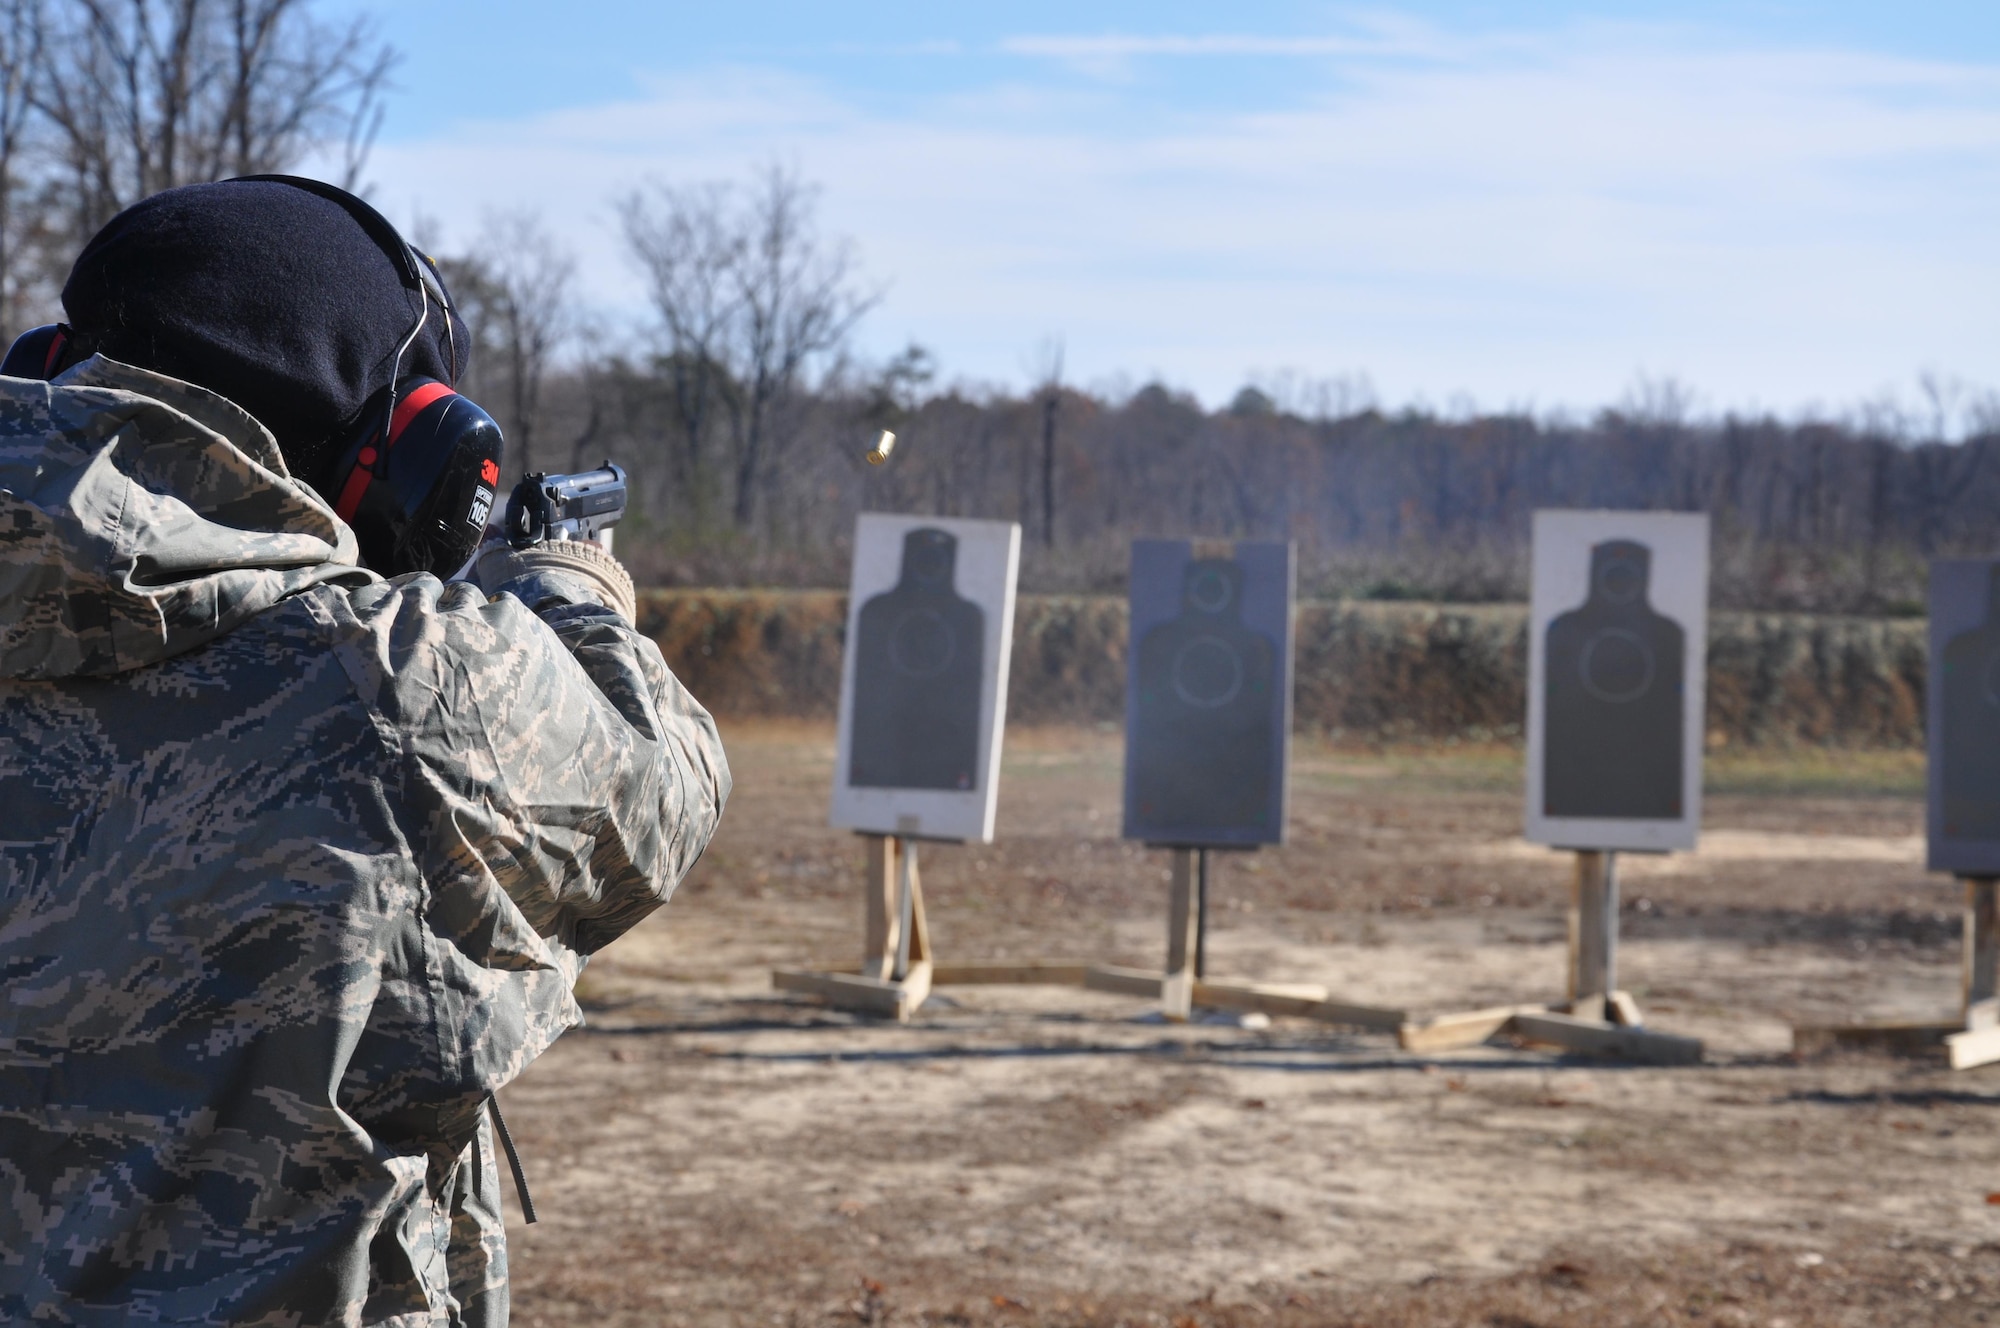 A member of the 459th Security Forces Squadron fires an M9 handgun at a target at Marine Corps Base Quantico, Virginia, firing range Dec. 3, 2016. More than 150 459th SFS members traveled from Joint Base Andrews, Maryland, to Quantico to train on the M4 assault rifle and M9 handgun. (U.S. Air Force photo/Senior Airman Kristin Kurtz)